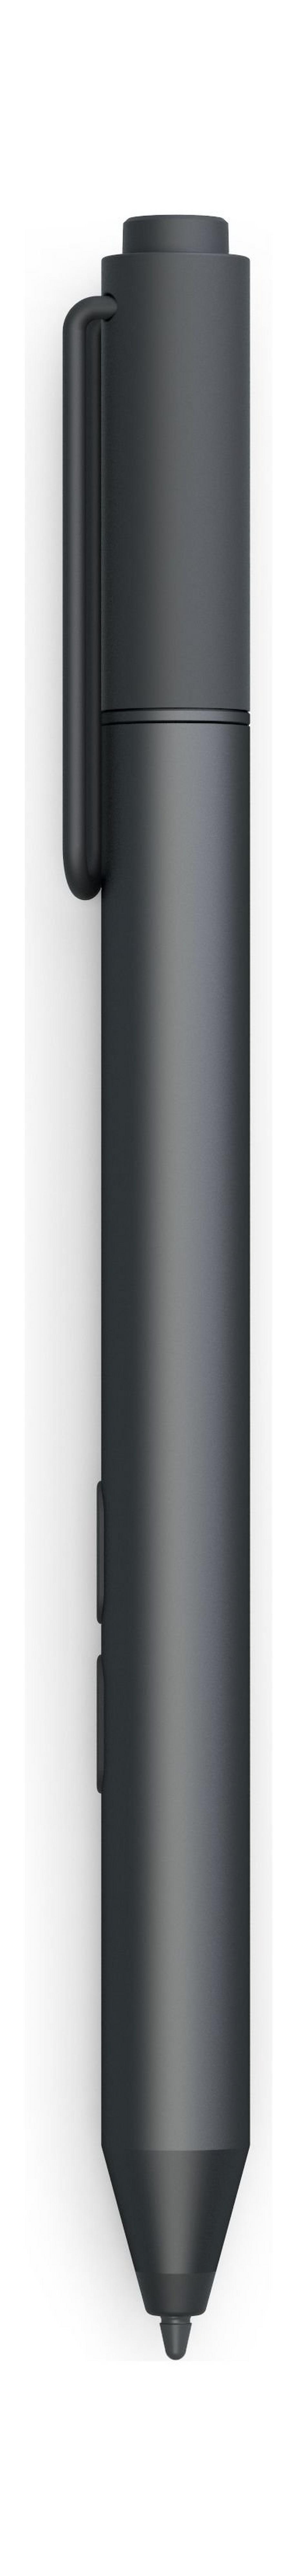 Microsoft Surface Pen for Surface – Black